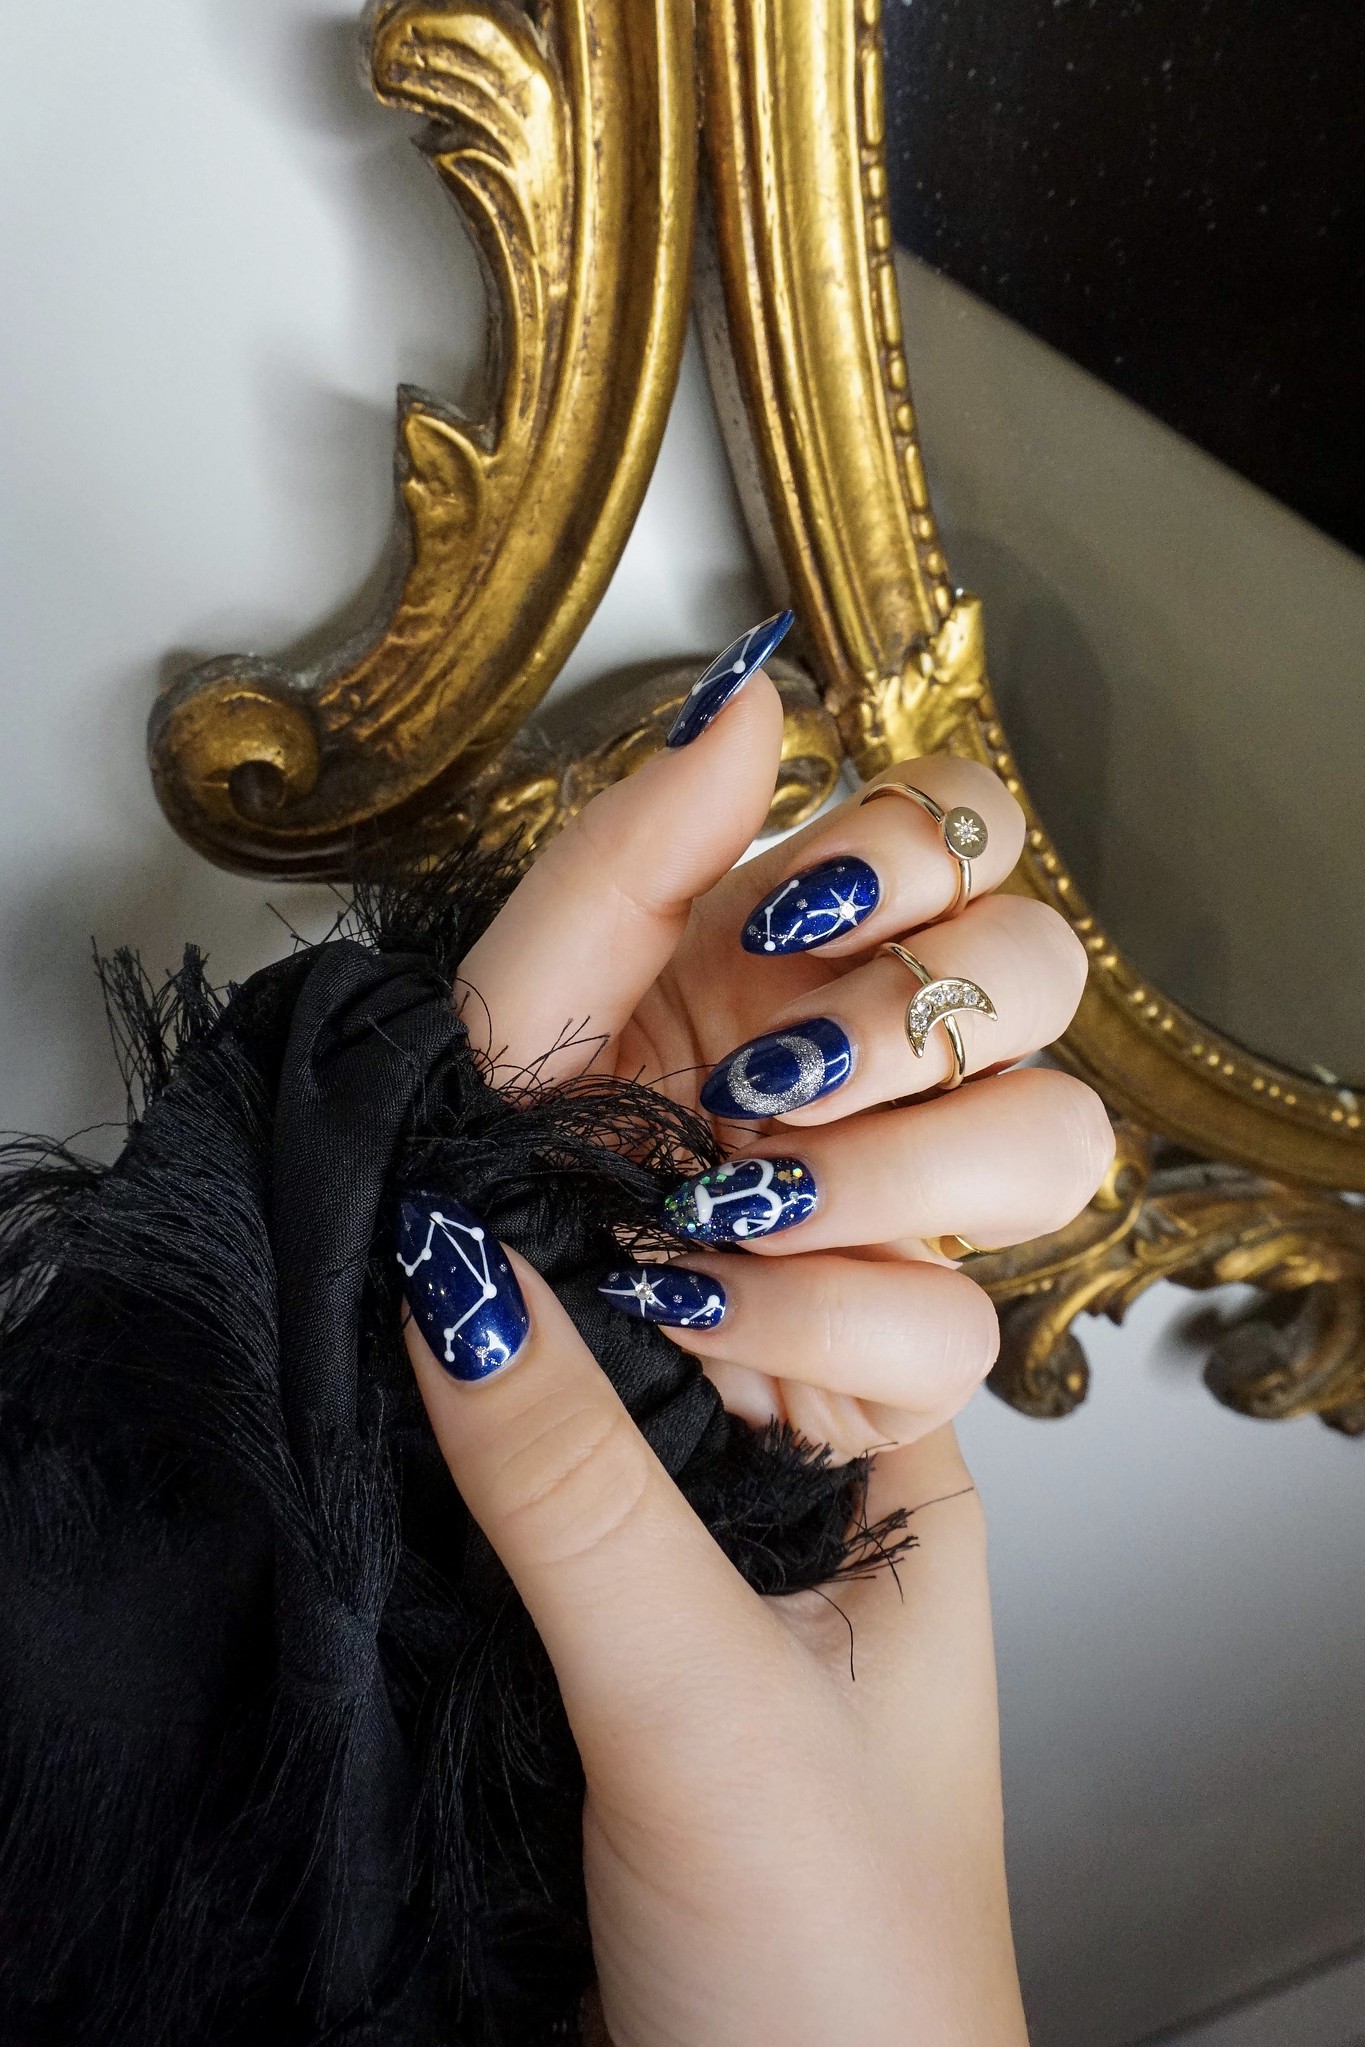 Libra Nails | Zodiac Manicure | Astrological Sign Mani | Navy Sparkle Star Nails | Witchy Halloween Nails | Nail Art | Star Nail Designs | Almond Shape Nails | Fall Nails | Spooky Nails 